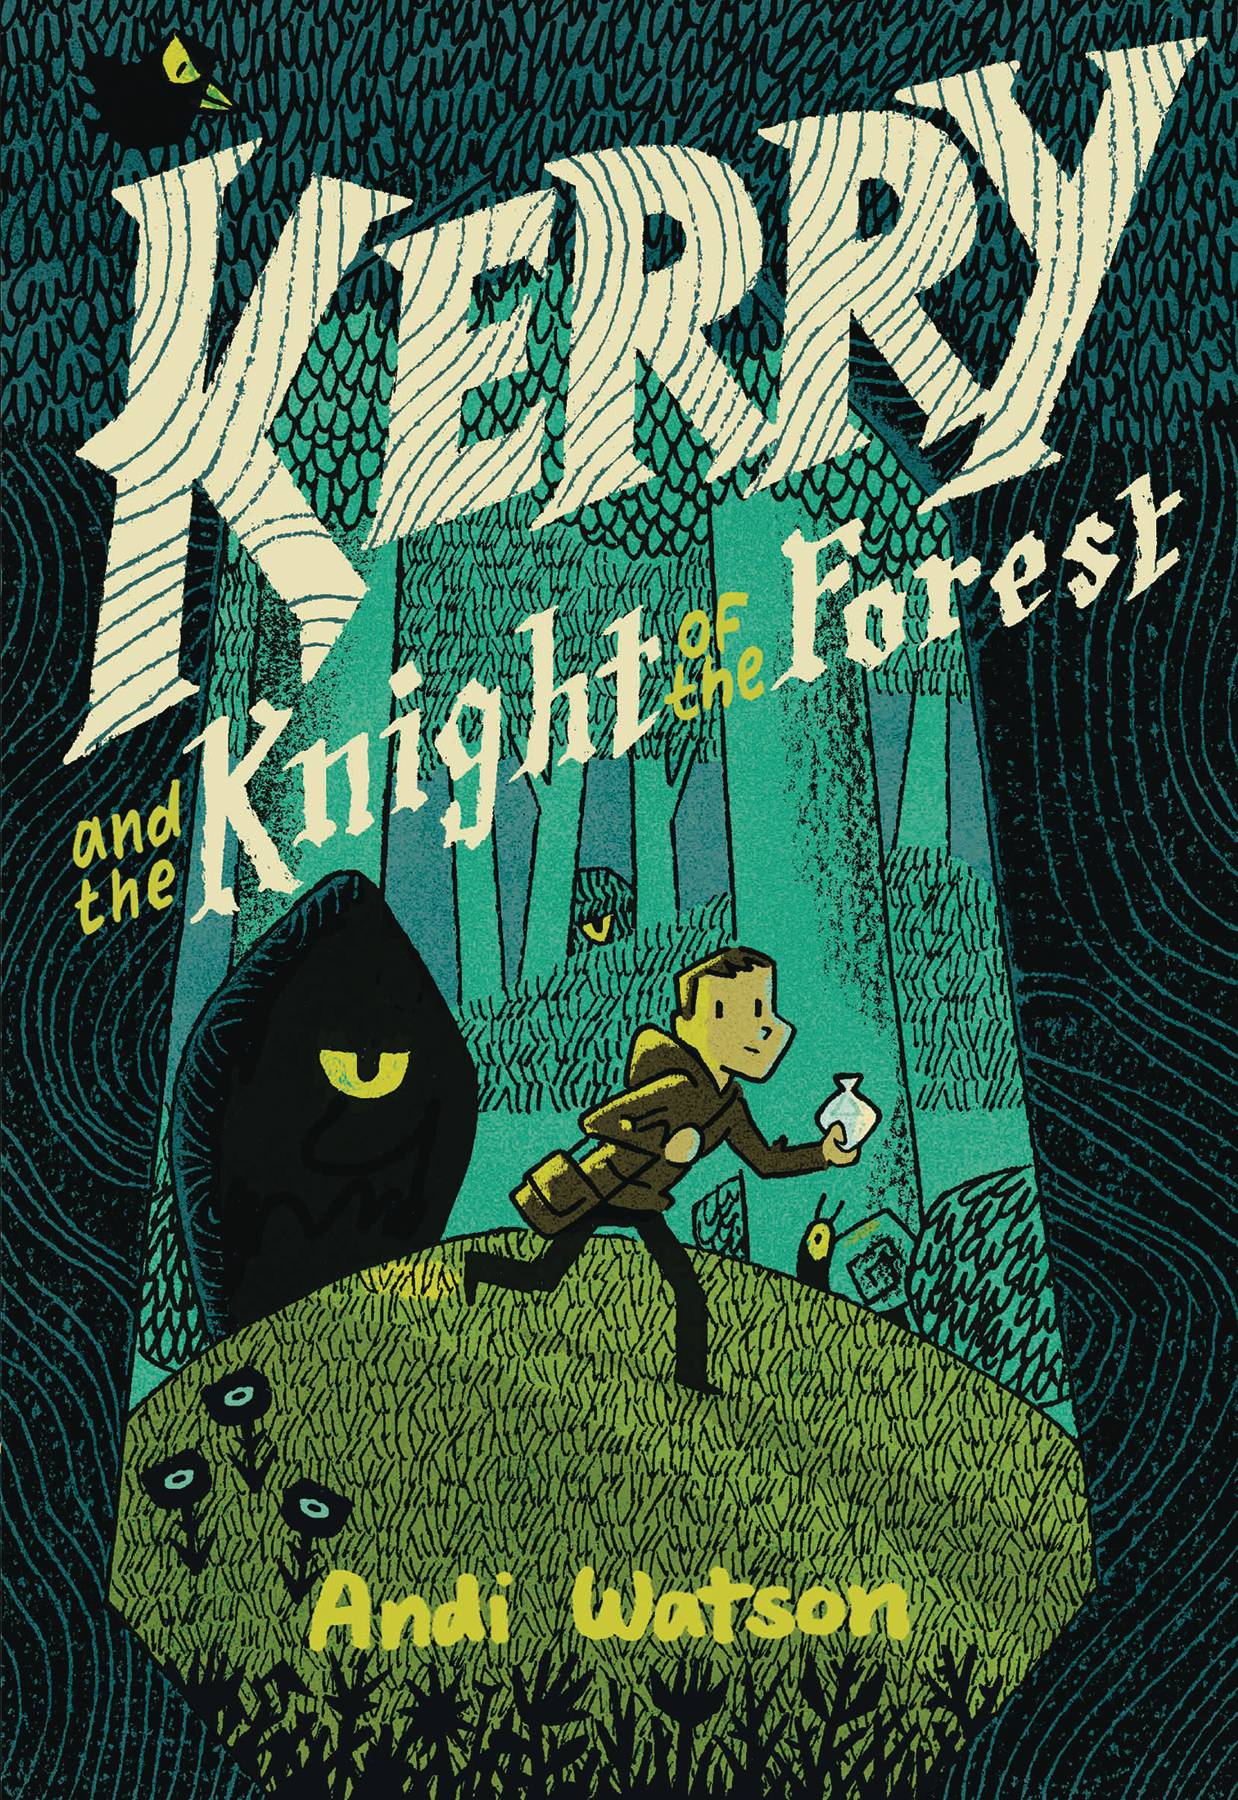 KERRY AND KNIGHT OF THE FOREST TP